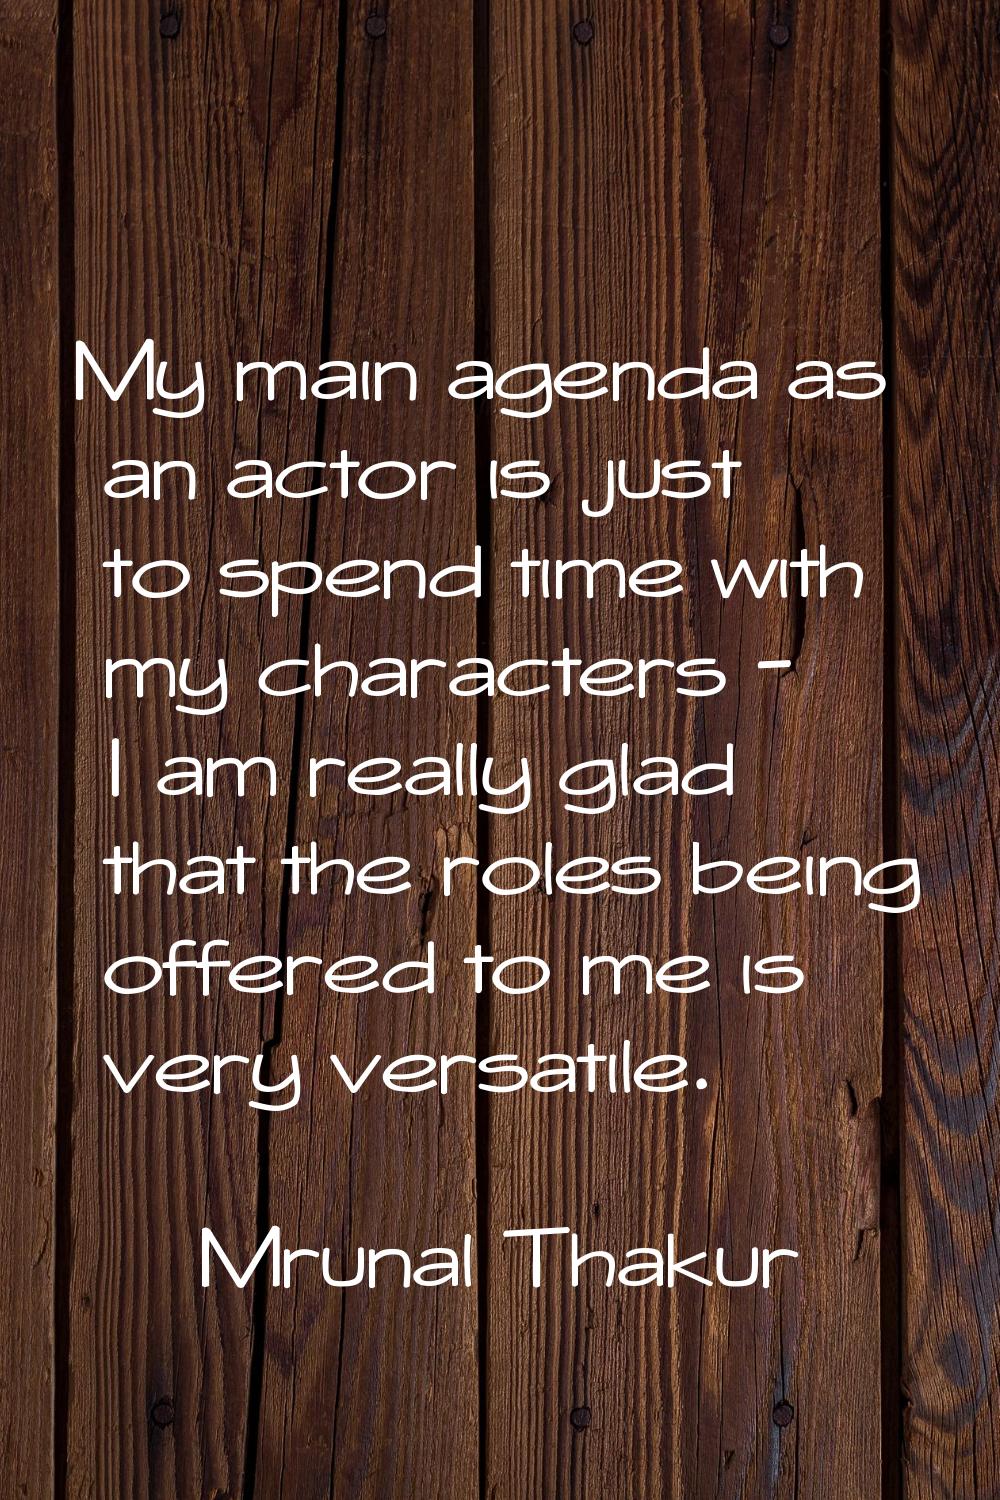 My main agenda as an actor is just to spend time with my characters - I am really glad that the rol